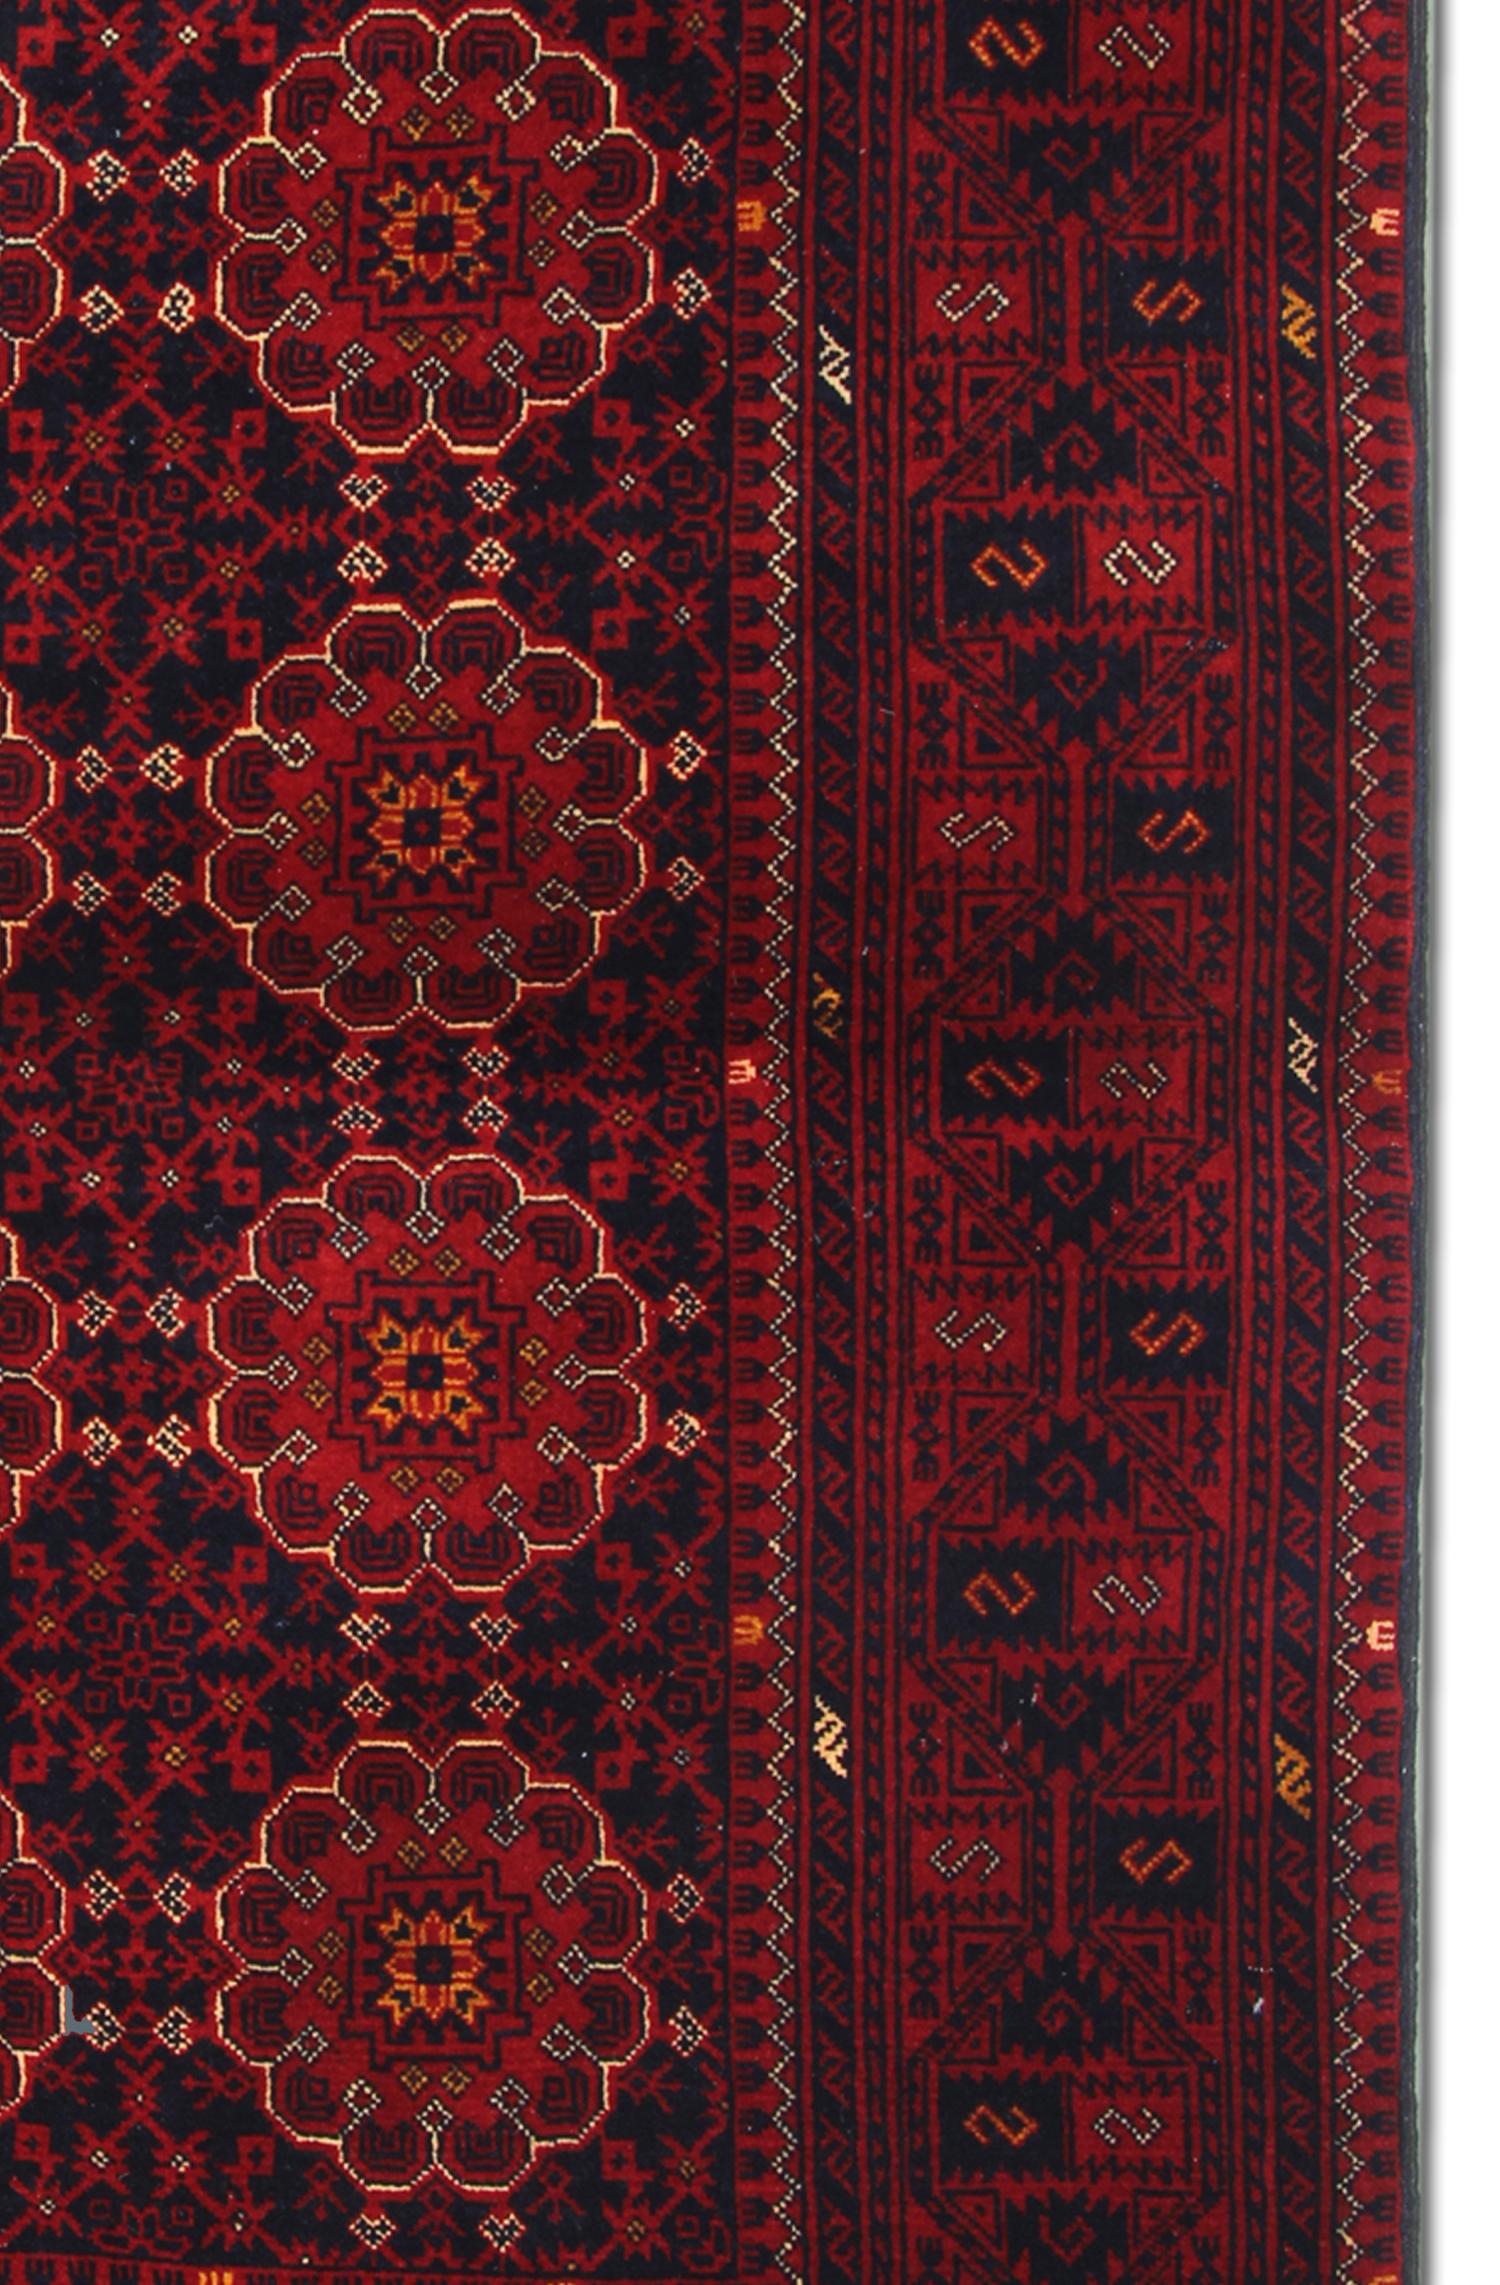 Handwoven Wool Rug Traditional Deep Red Carpet Rustic Area Rug In Excellent Condition For Sale In Hampshire, GB